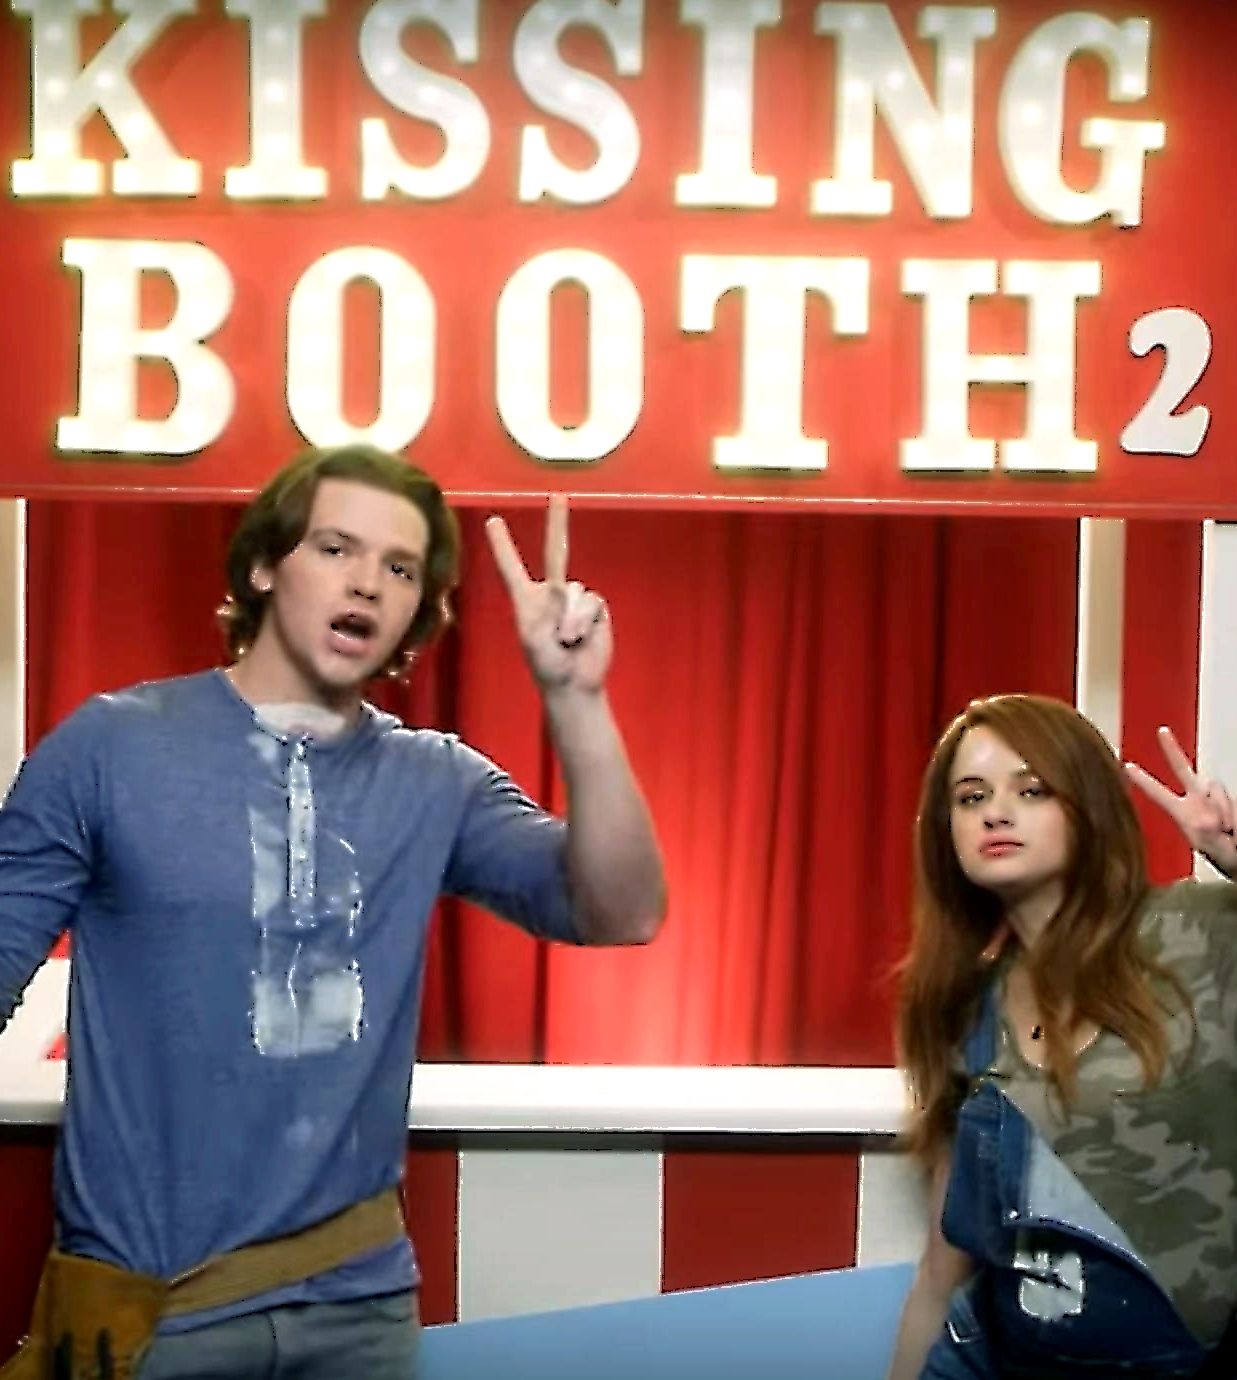 The Kissing Booth 2 Caly Film The Kissing Booth 2 - Film (2020) - SensCritique